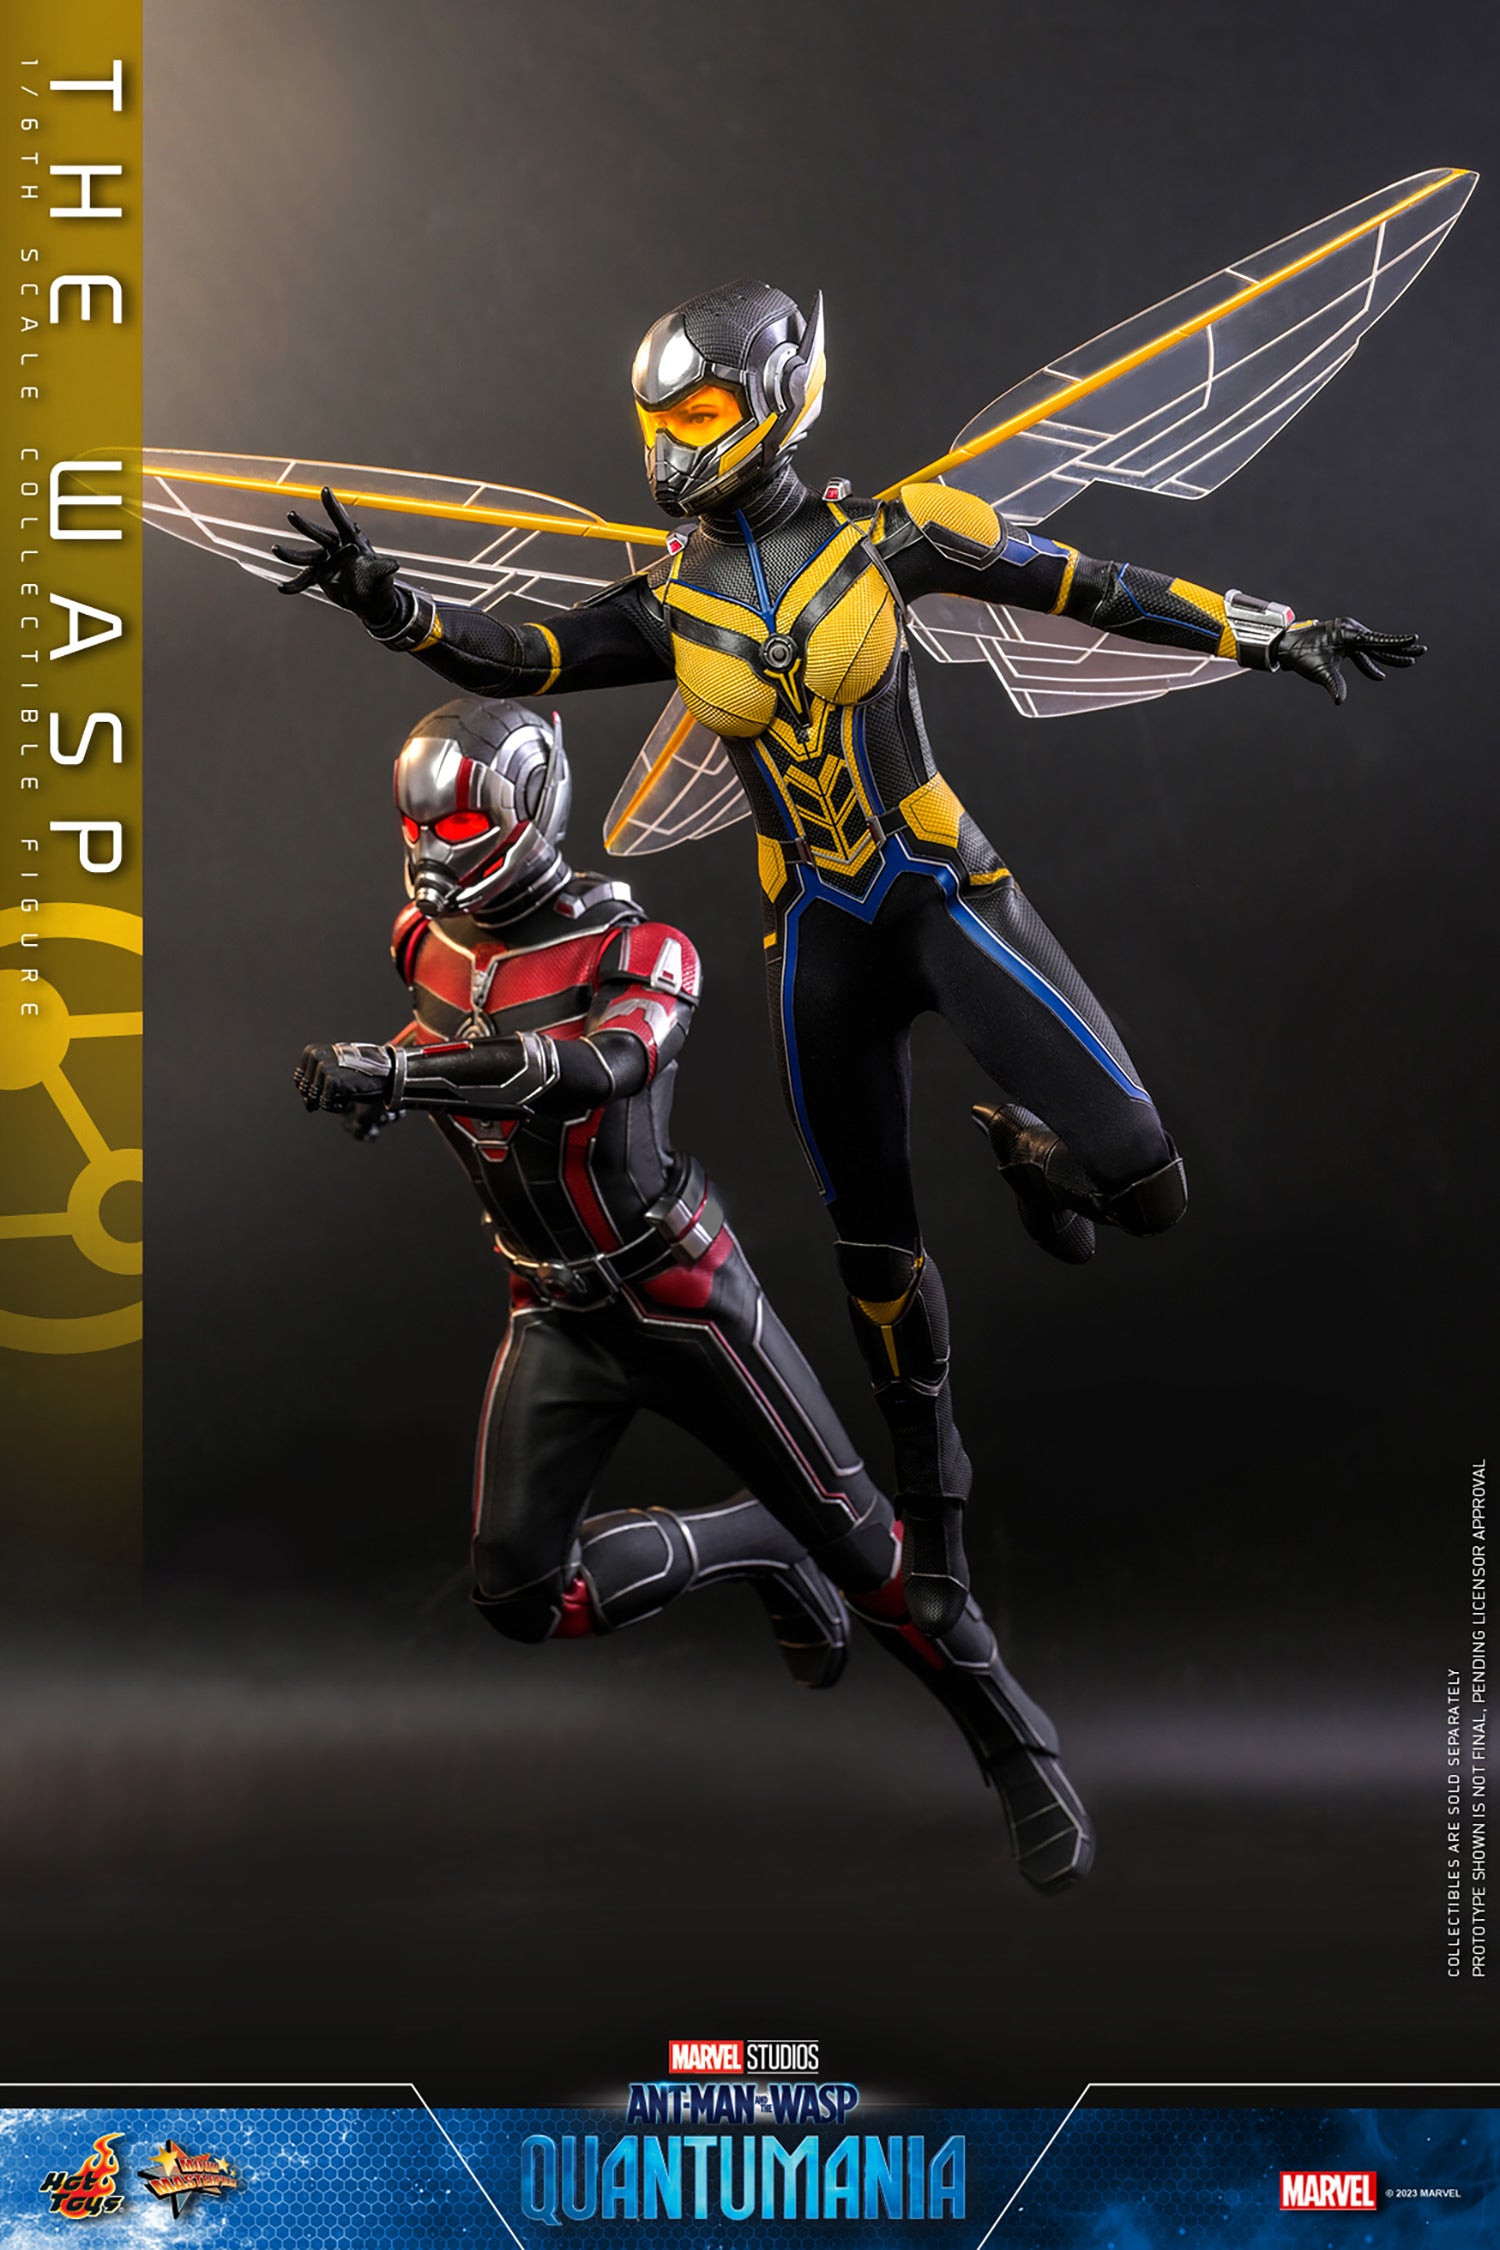 Hot Toys Marvel Comics Ant-Man and the Wasp Quantumania the Wasp 1